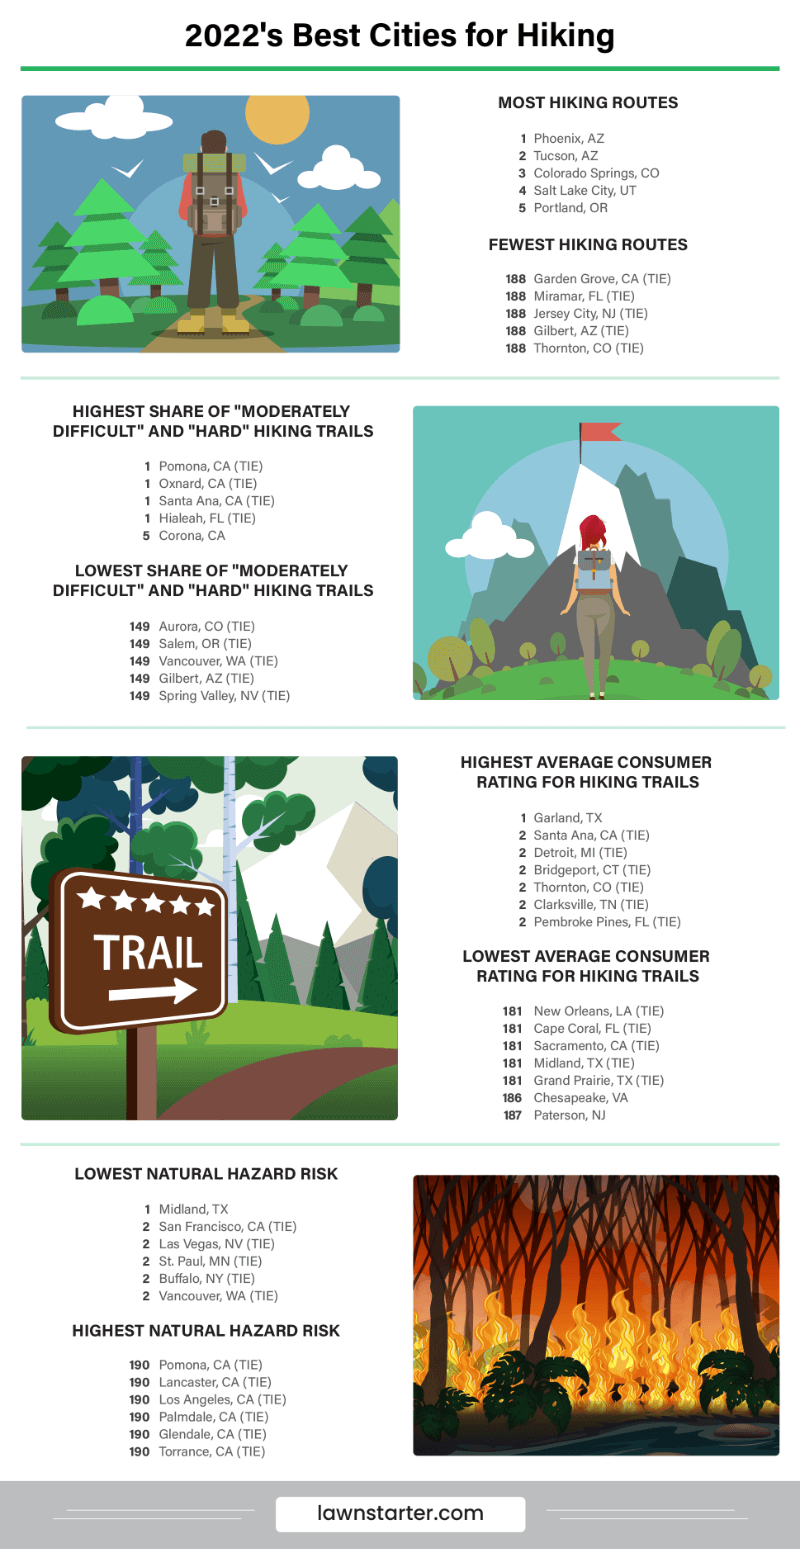 2022's Best Cities for Hiking Infographic based on on number of hiking routes, difficulty, consumer ratings, and more!